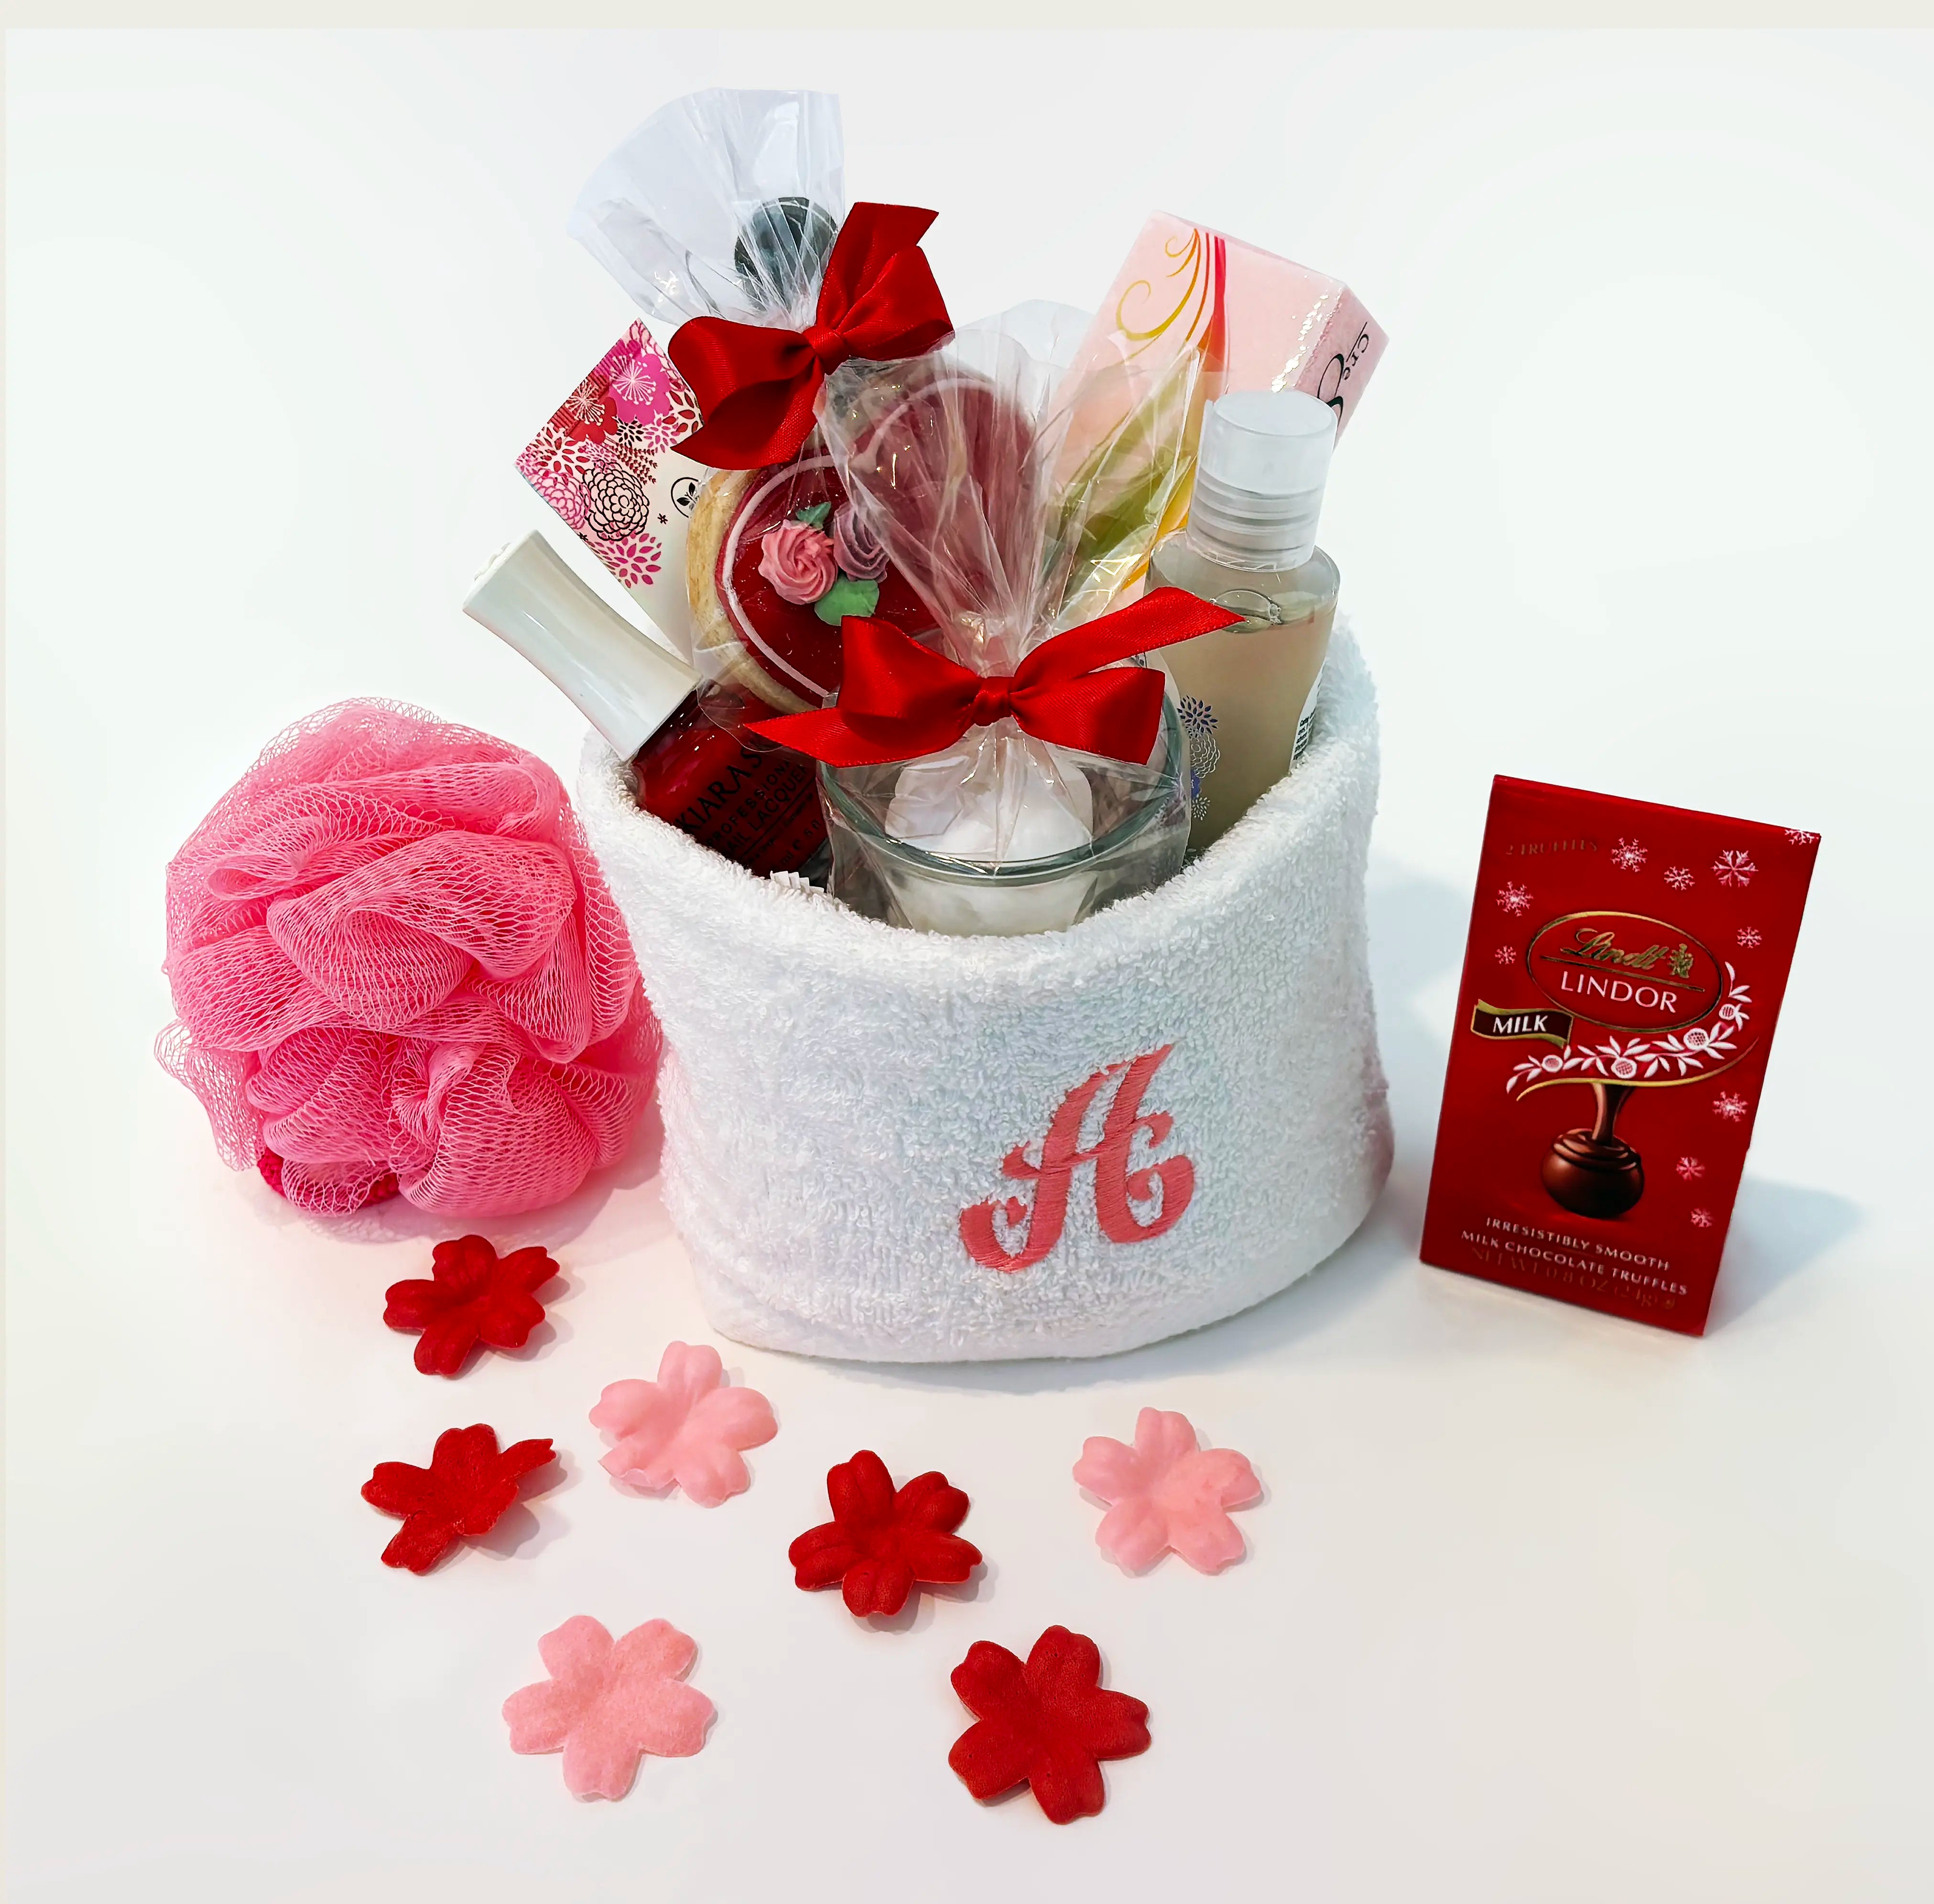 Amazon.com : Birthday Gifts for Women, Relaxing Spa Gift Box Basket for  Her, Pampering Gifts Thank You Gifts for Girls, Mom Wife Sister Best Friend  Unique Happy Birthday Bath Set Gift Ideas :